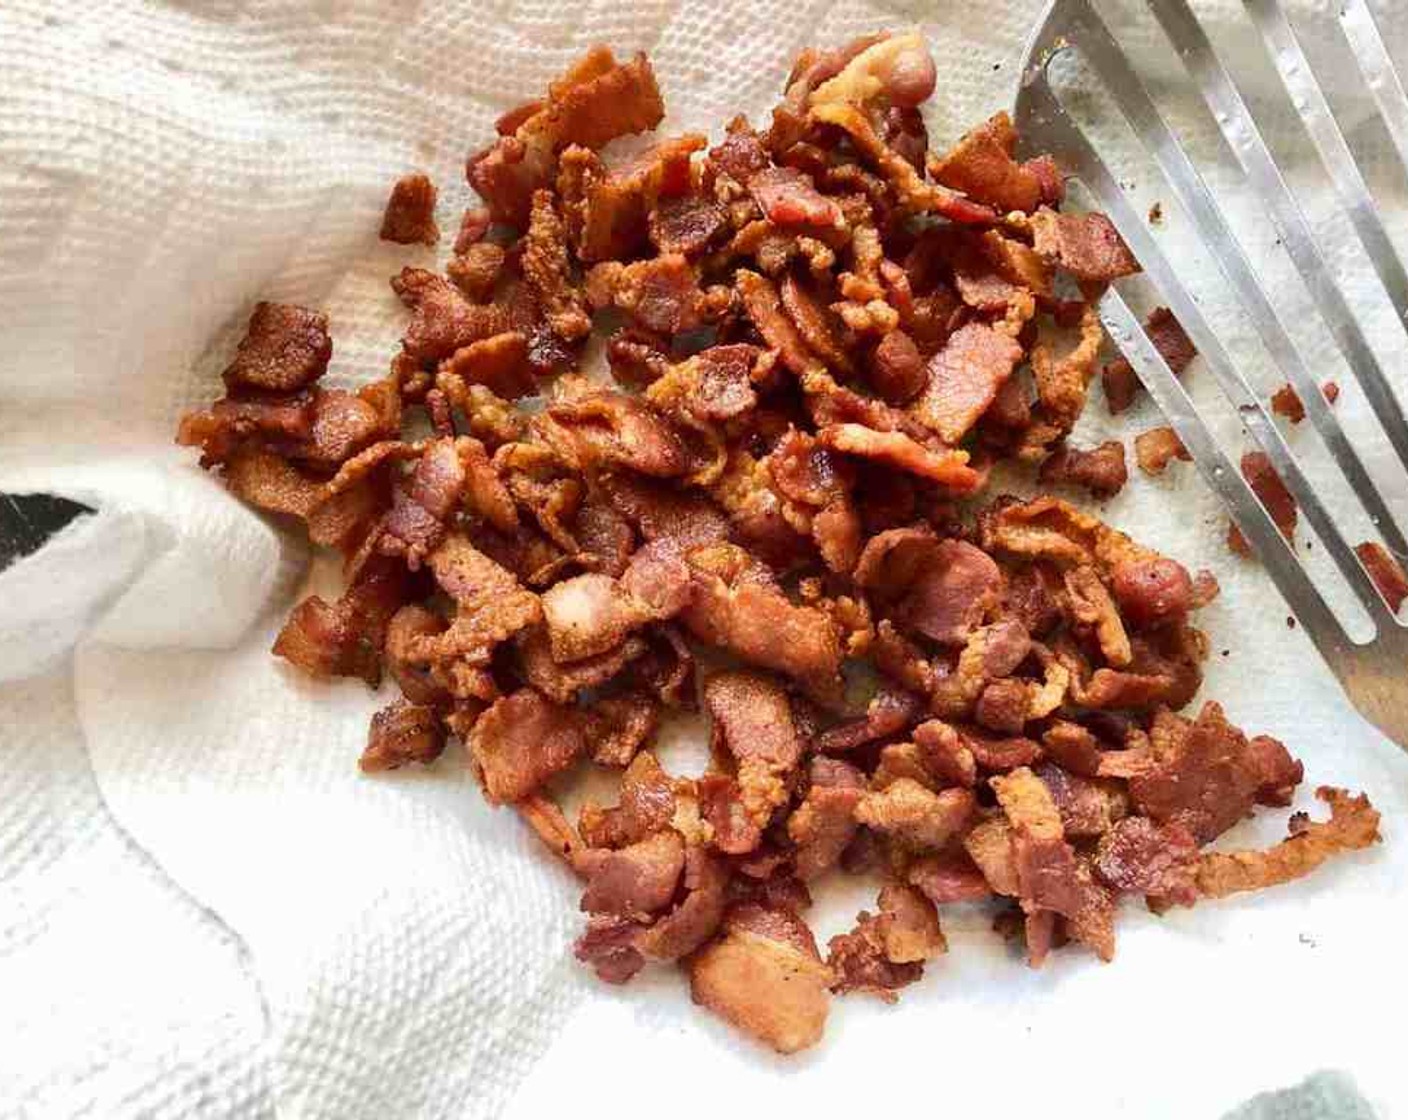 step 2 Cut Bacon (6 slices) into 1/2-inch pieces. Cook in a skillet until crisp, drain on paper towels. Set aside.